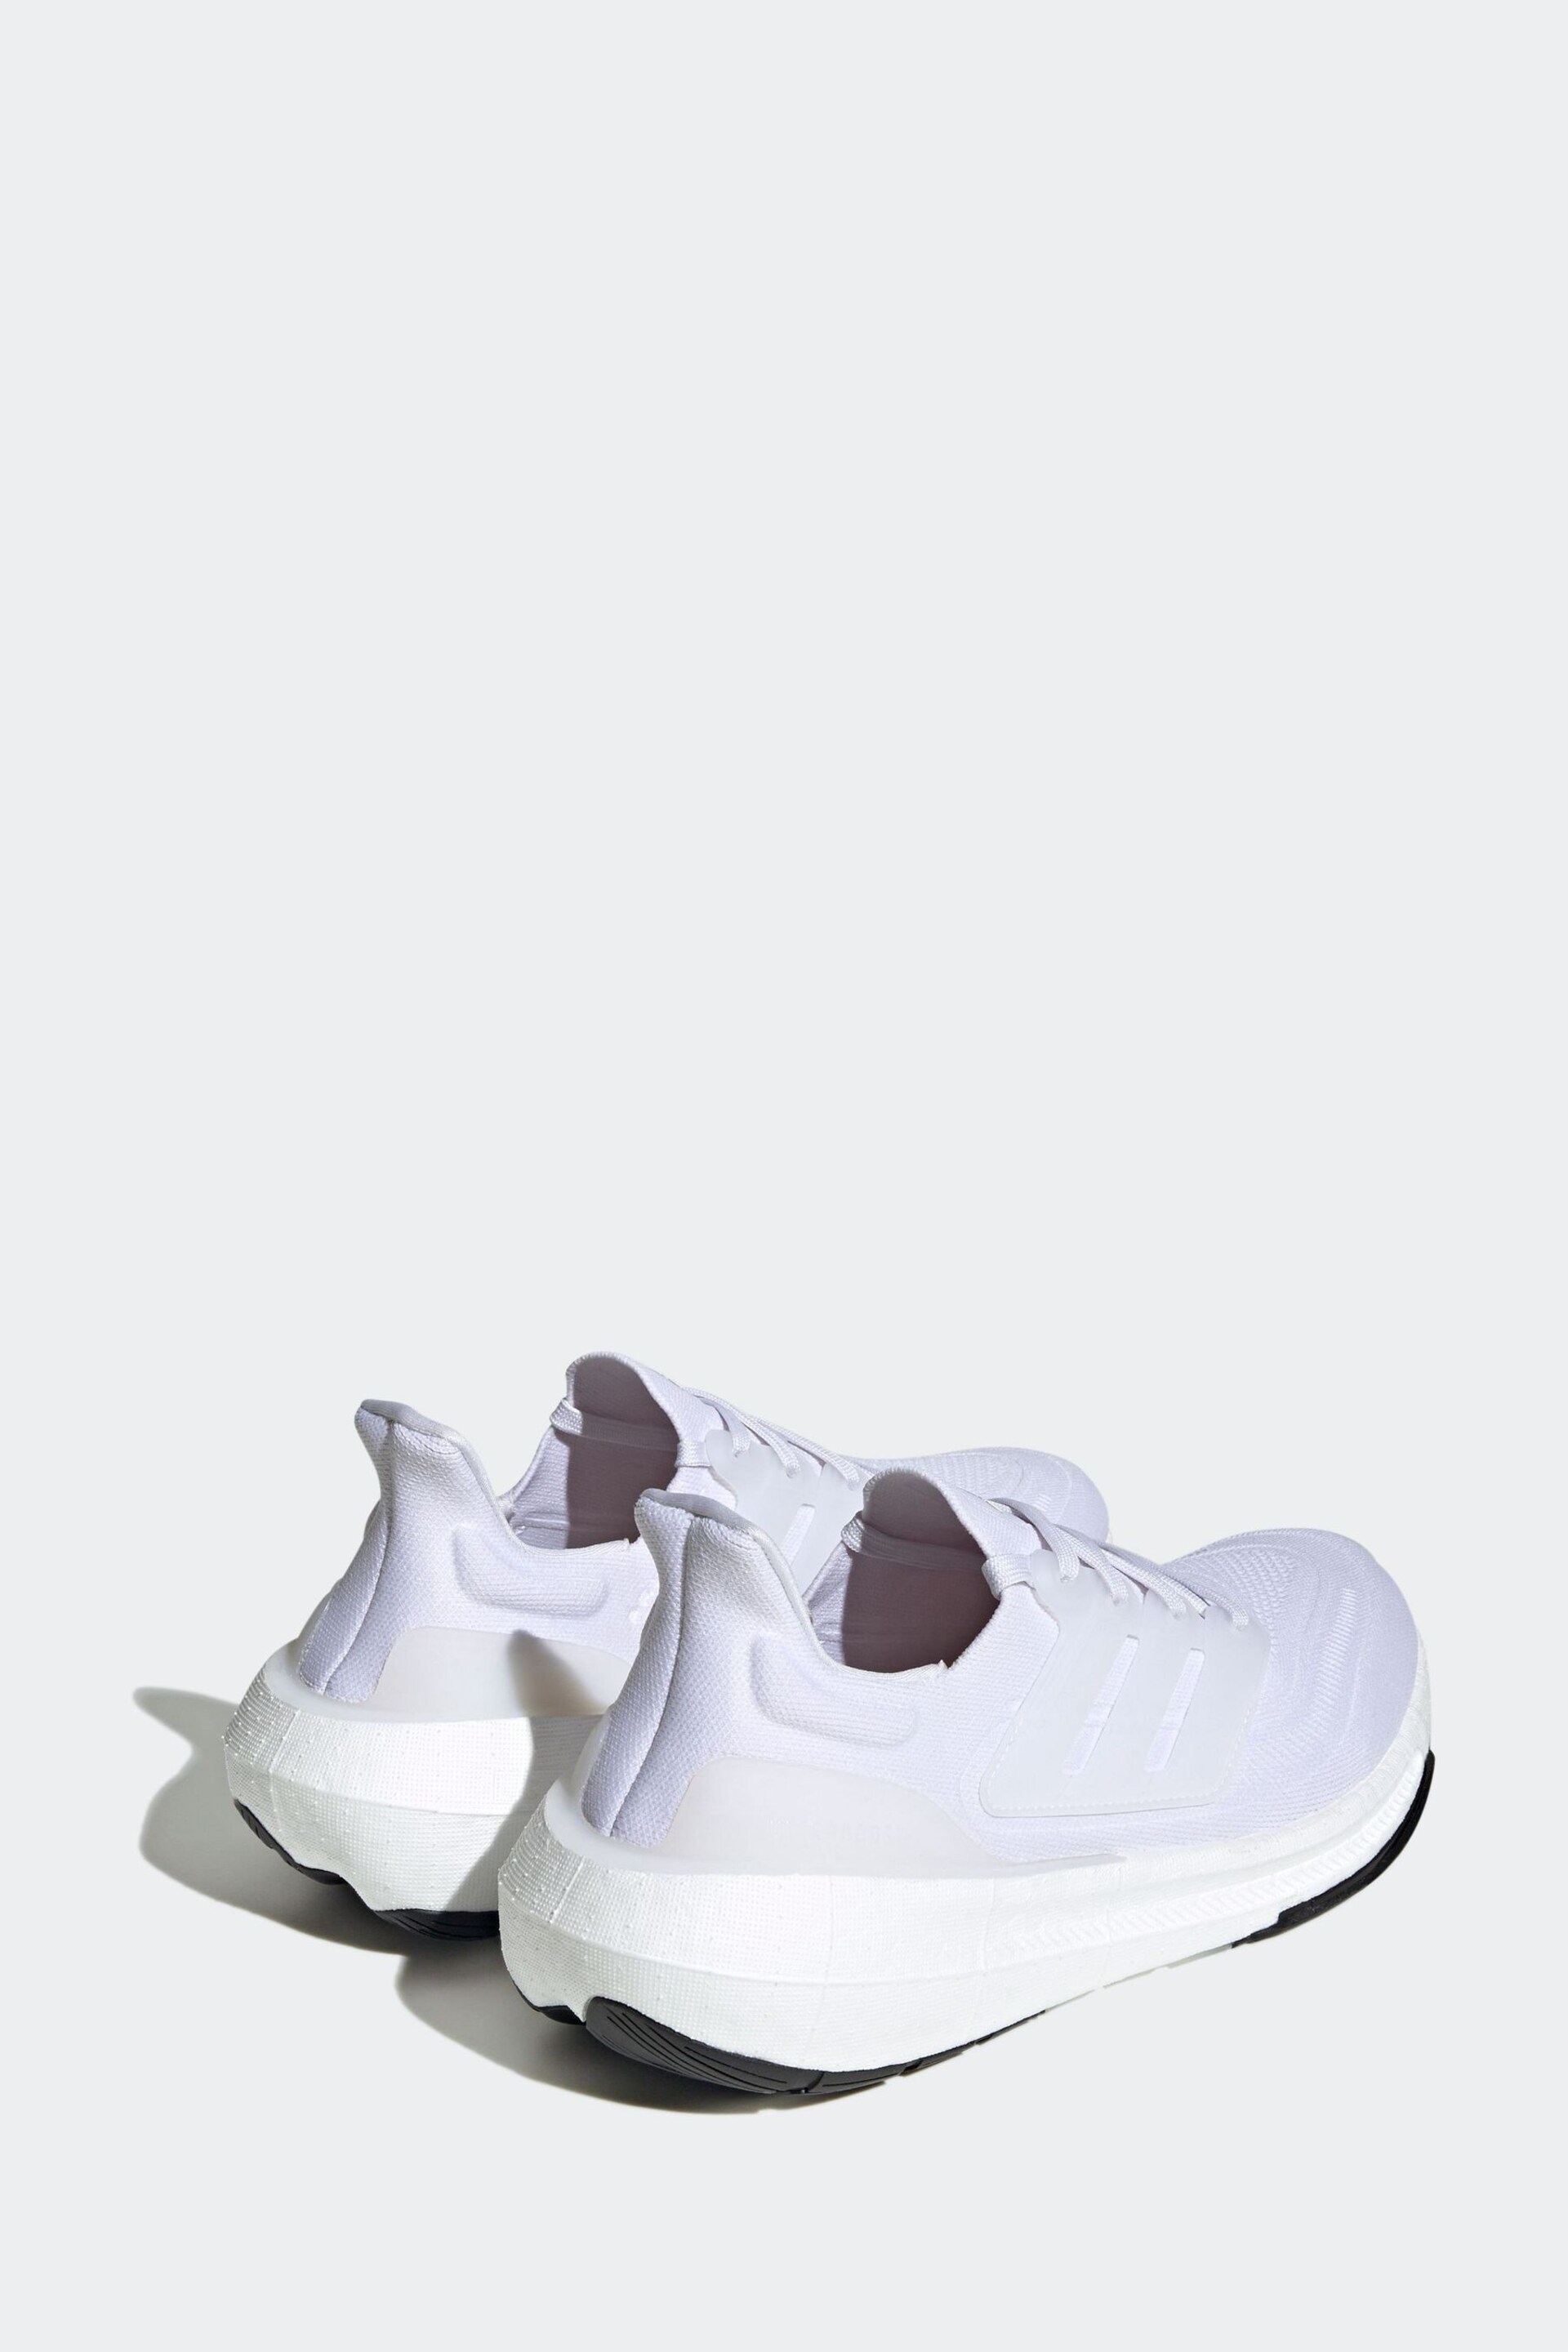 adidas White Ultraboost Light Trainers - Image 5 of 12